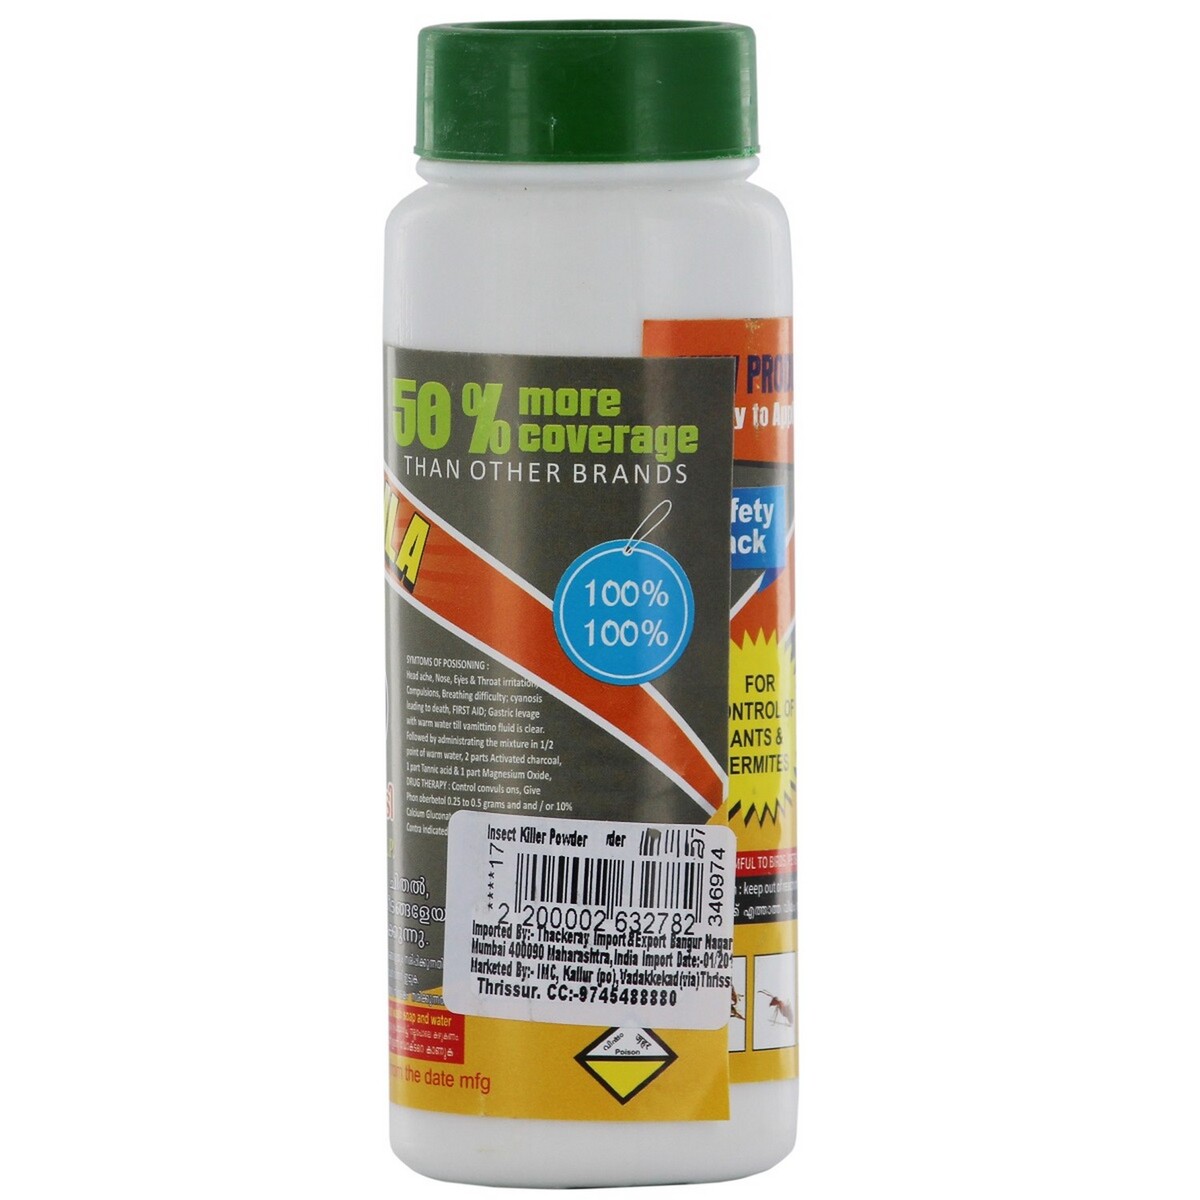 S.Co Insect Killer Powder